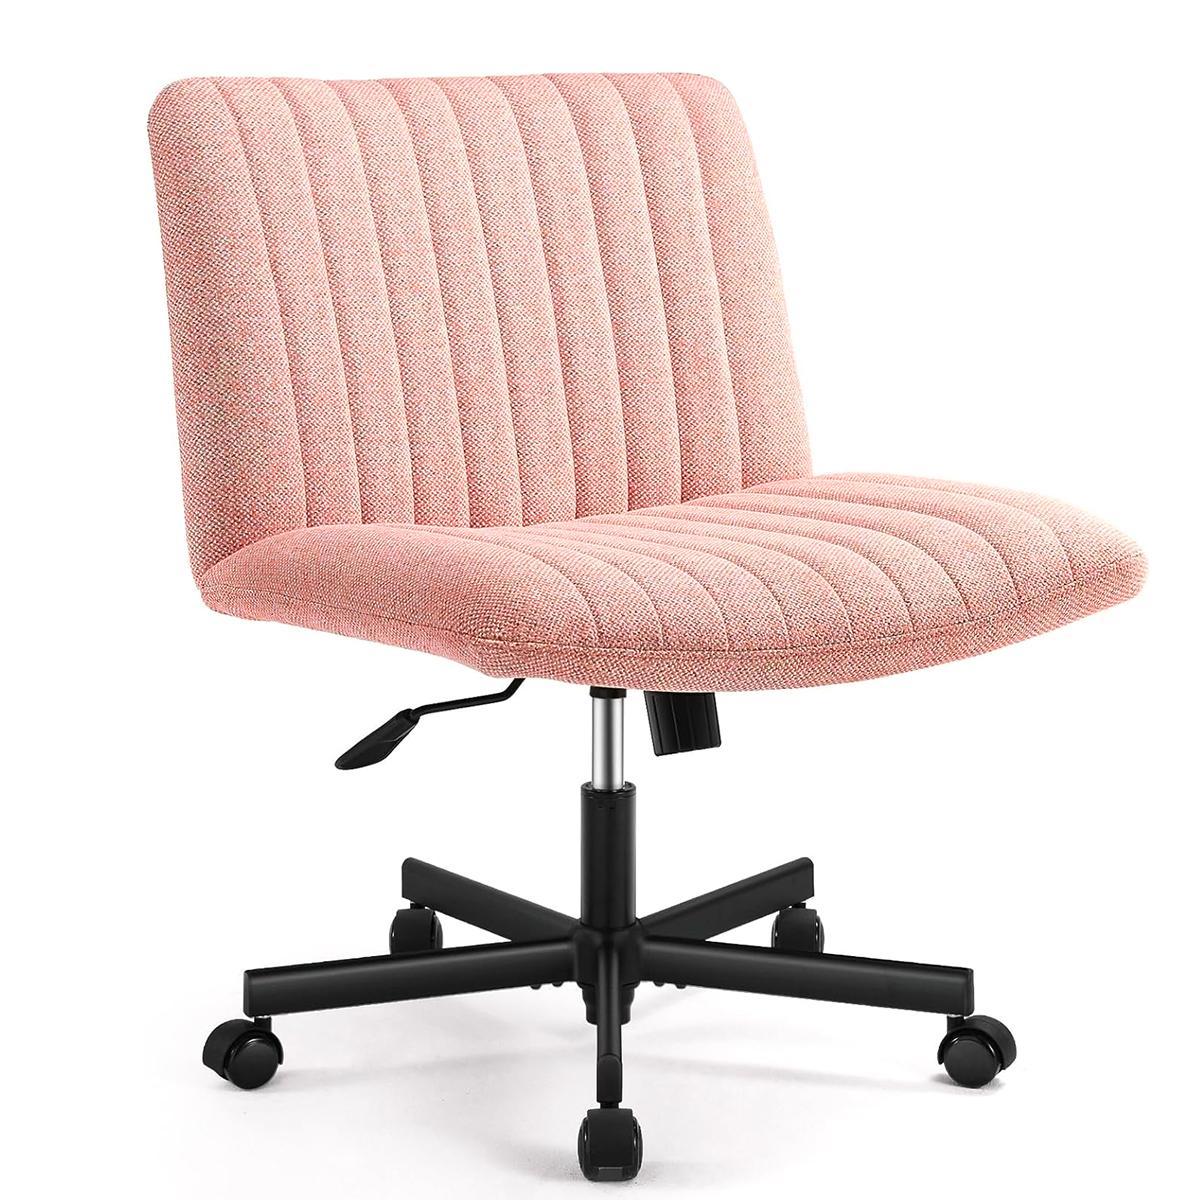 Viral Criss Cross Chair Plus Size Armless Swivel Home pink-fabric